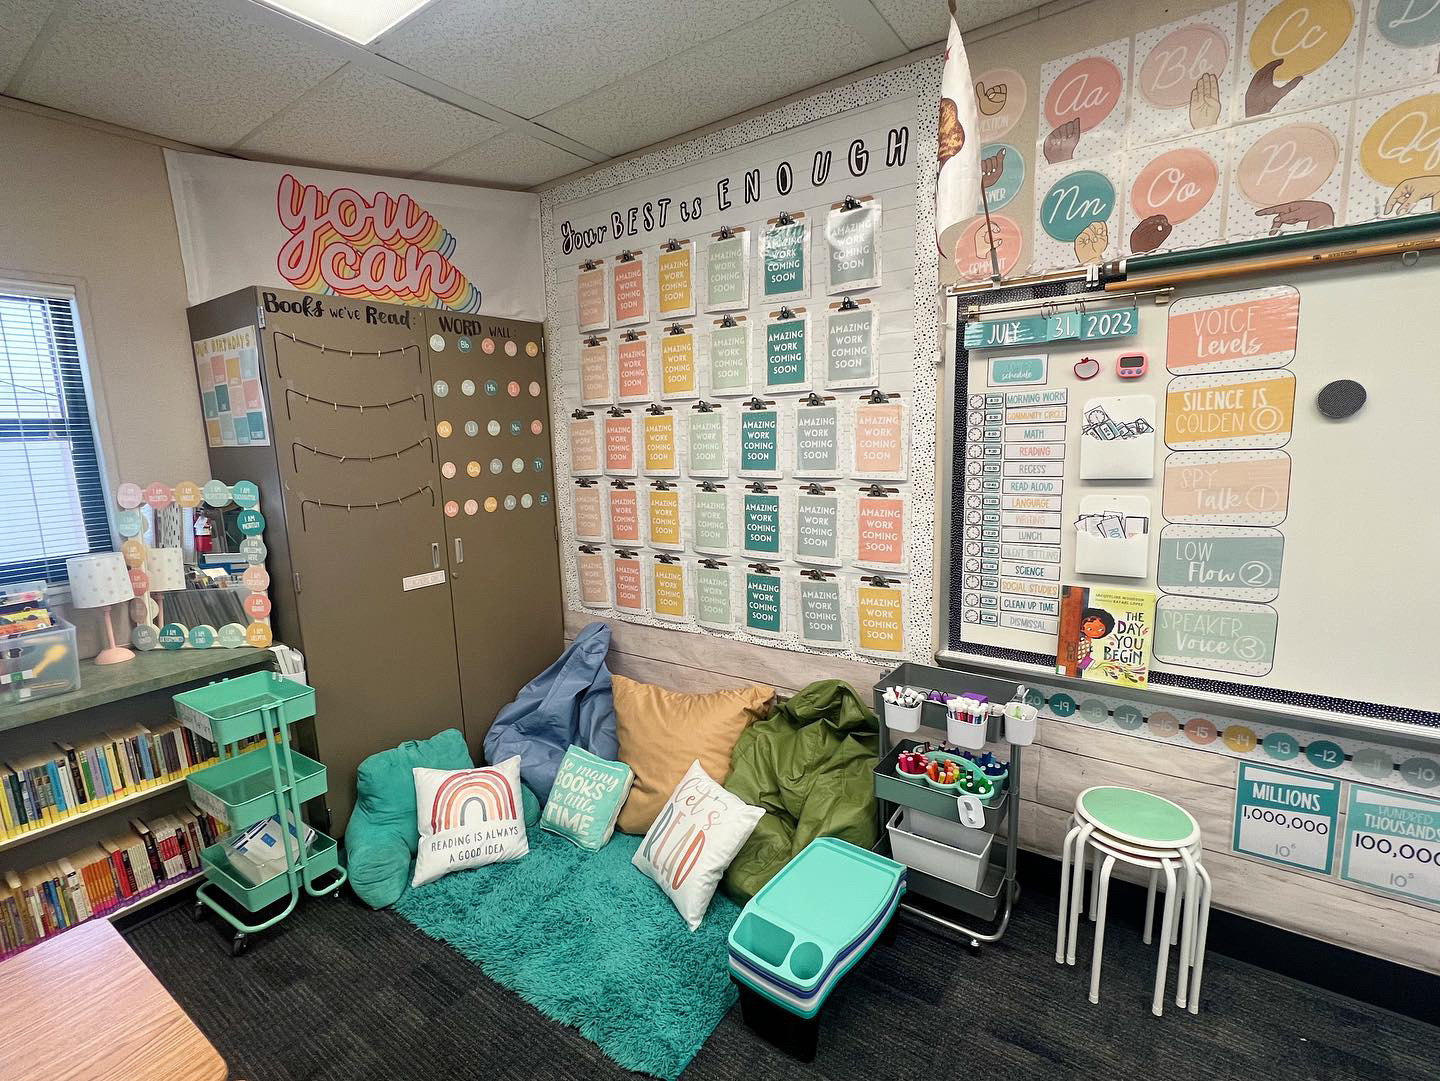 This image shows a classroom library with a rug and pillows thrown together on the floor. 